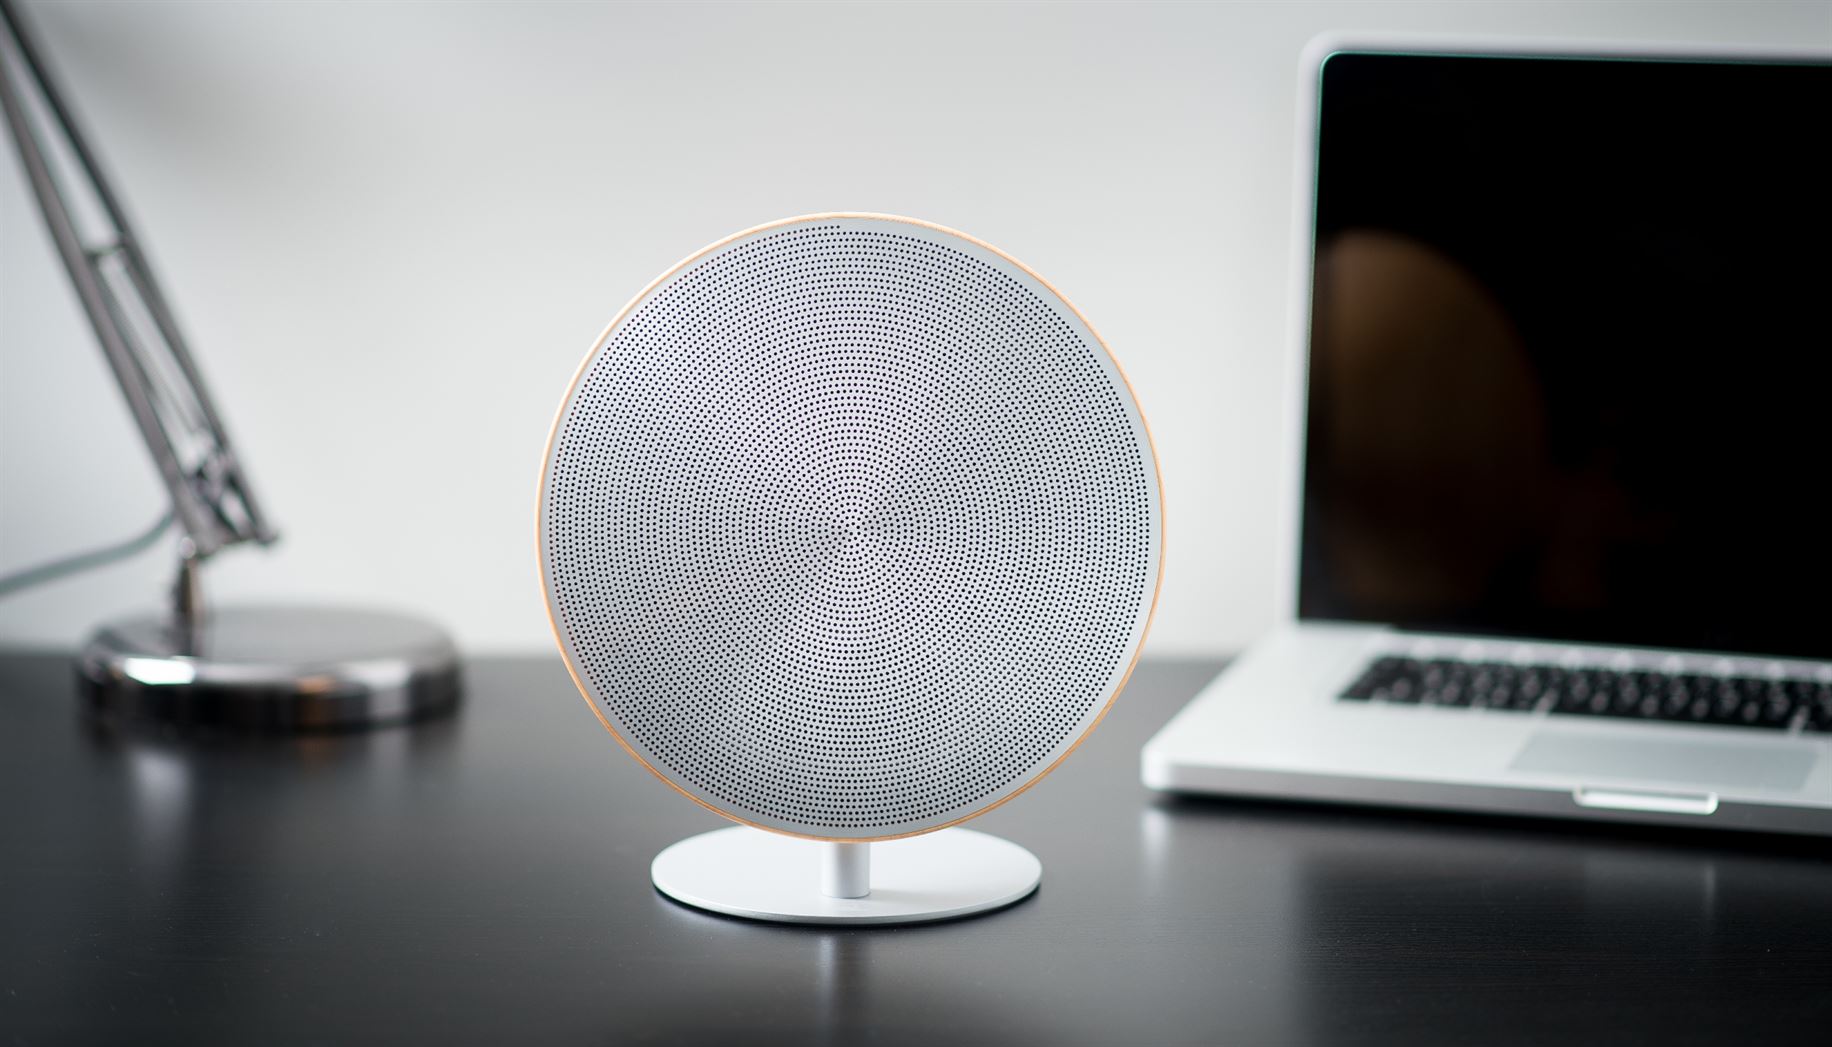 Gingko Halo One speaker on desk front view